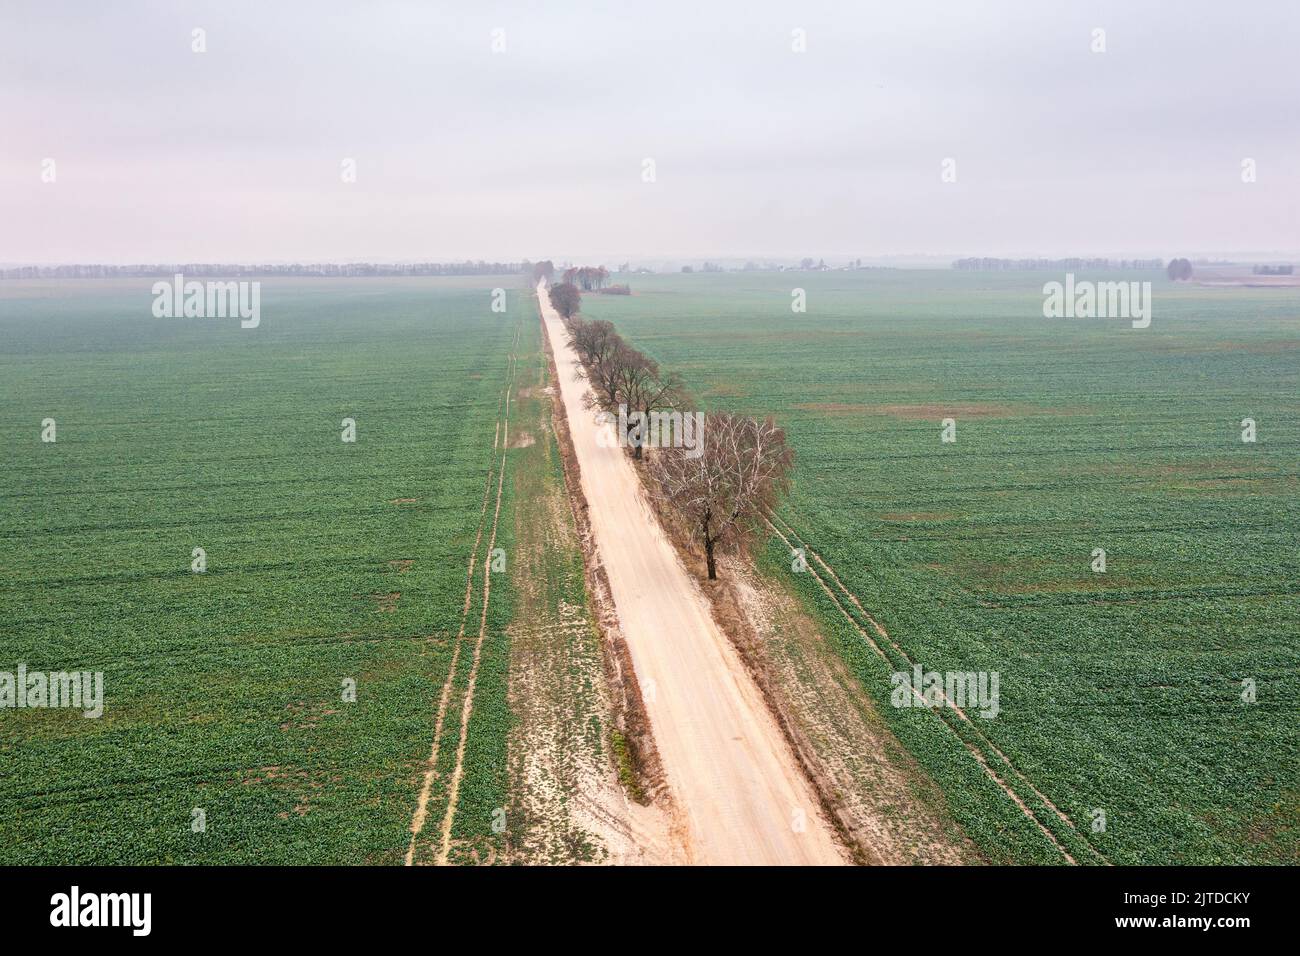 aerial view of rural landscape with straight dirt road through cultivated fields in foggy day Stock Photo